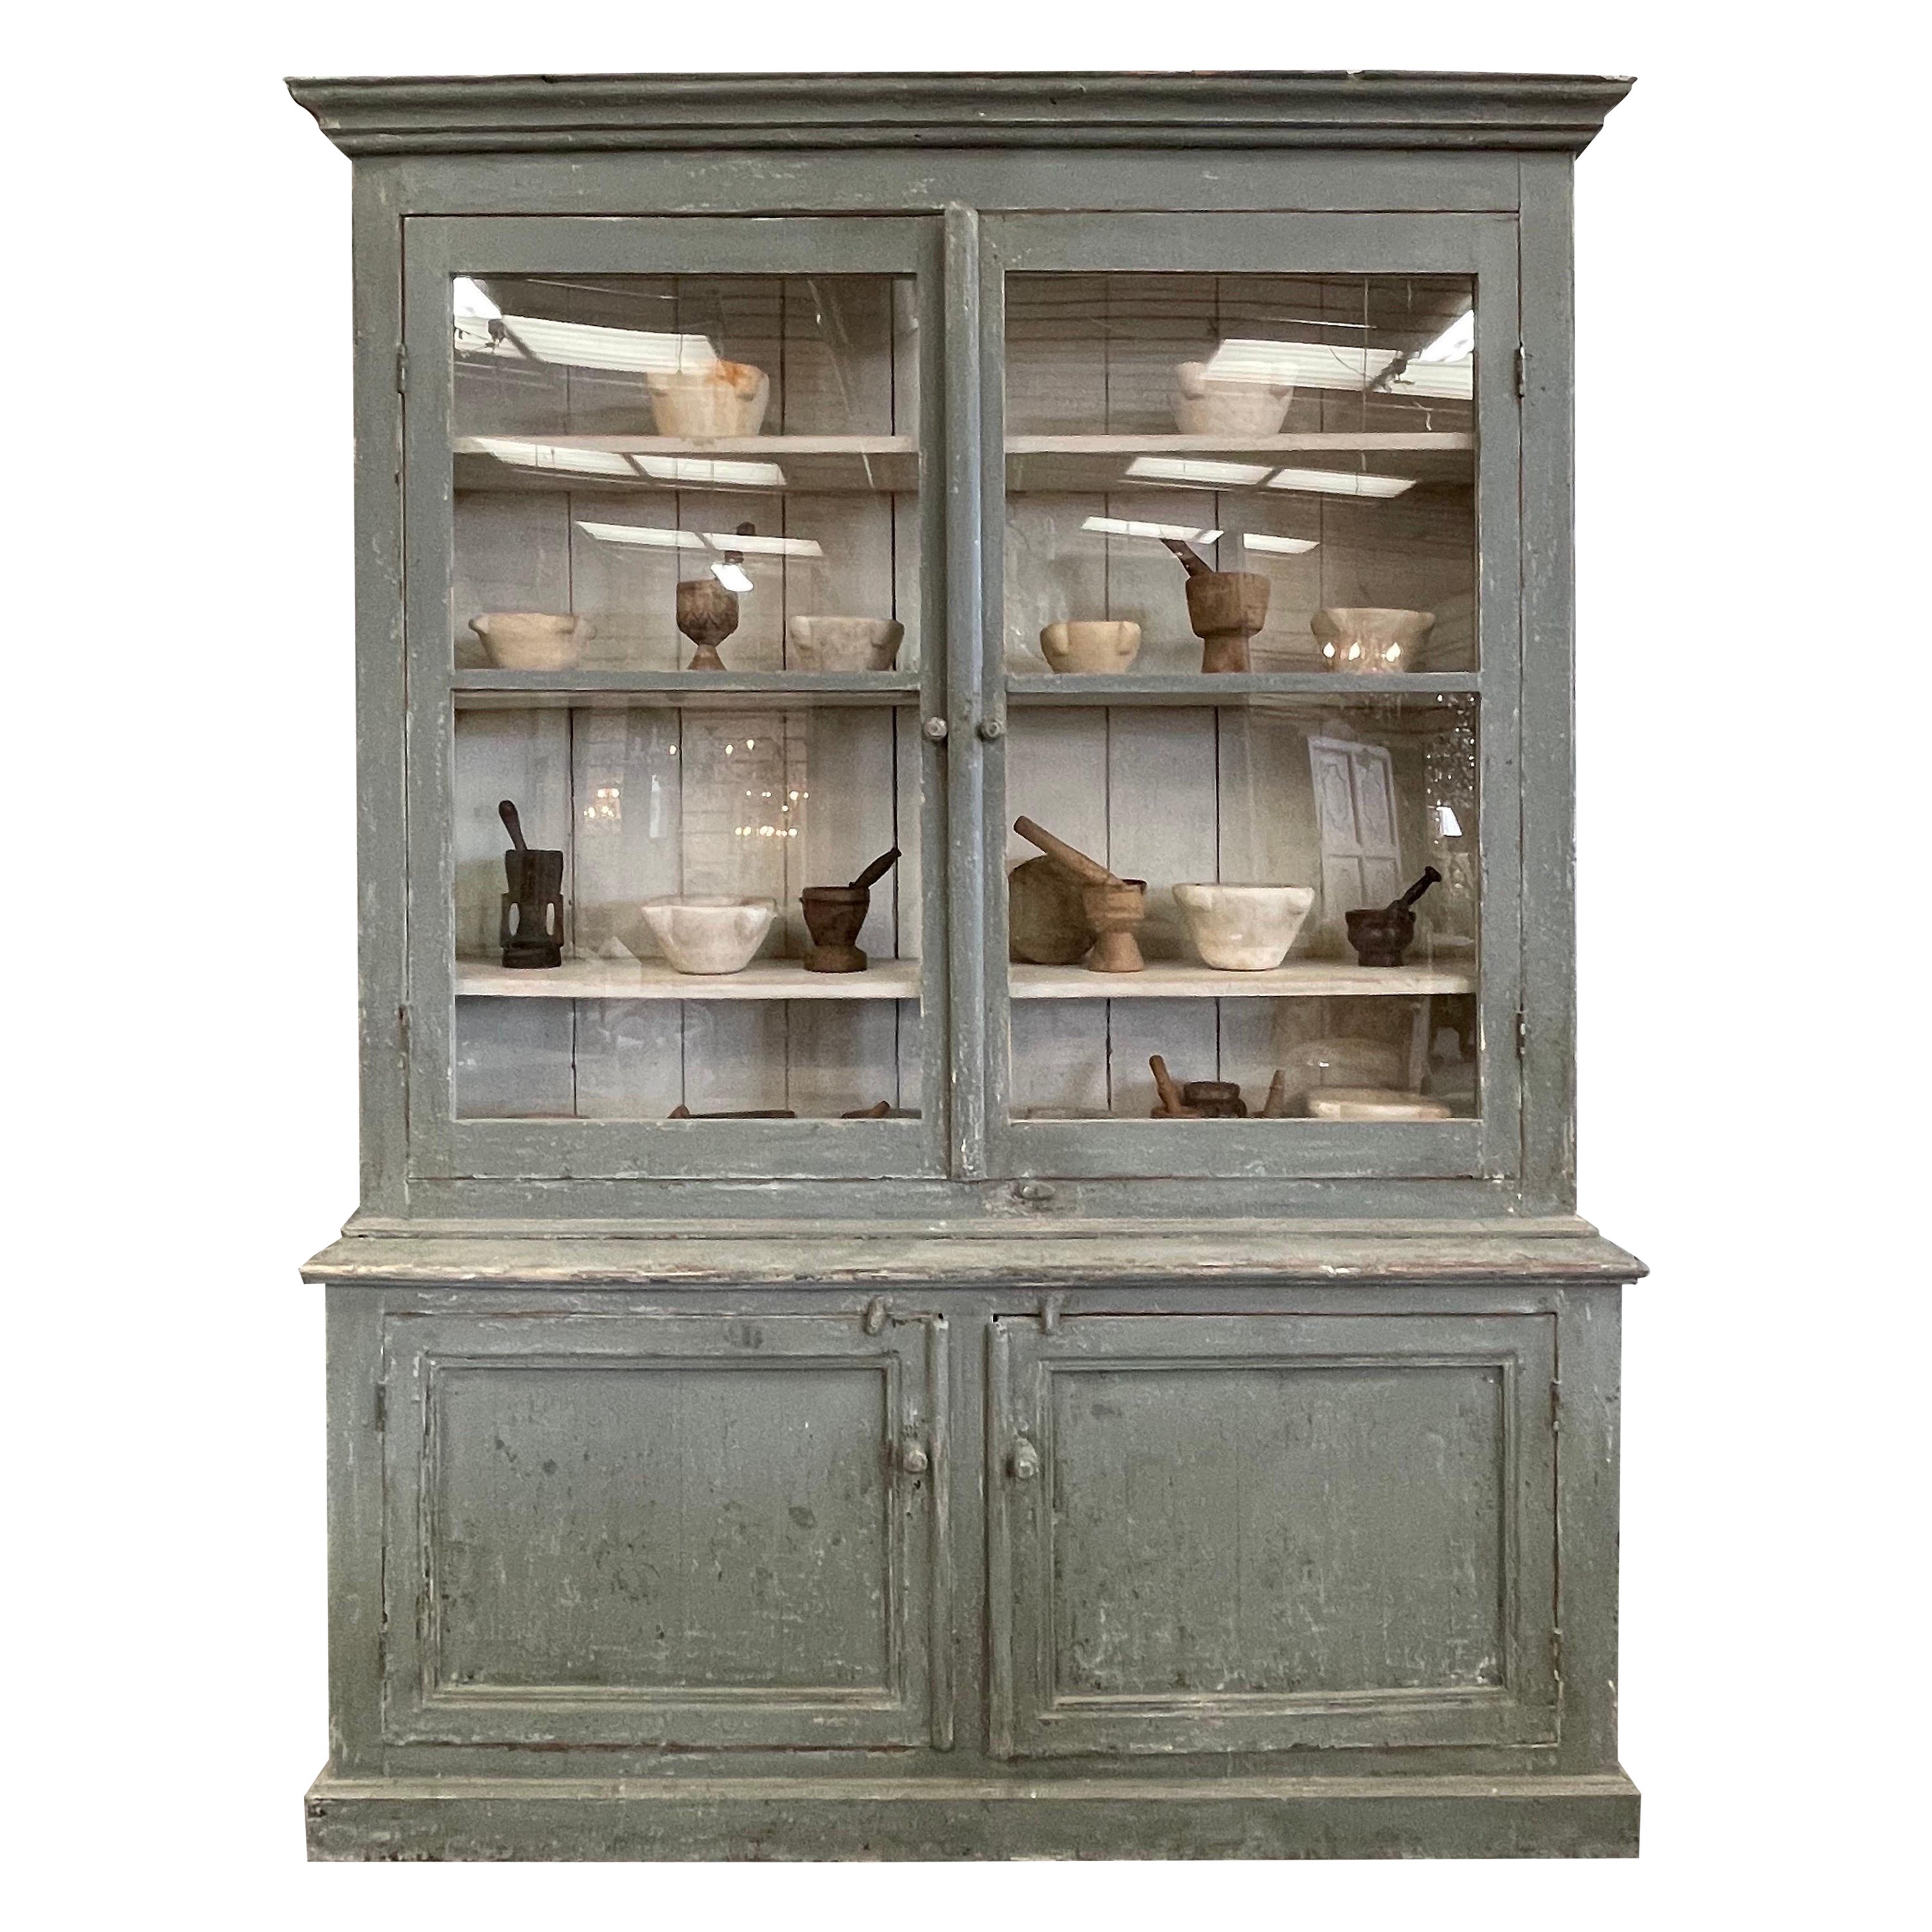 19th Century Painted Pharmacy Cabinet from Portugal